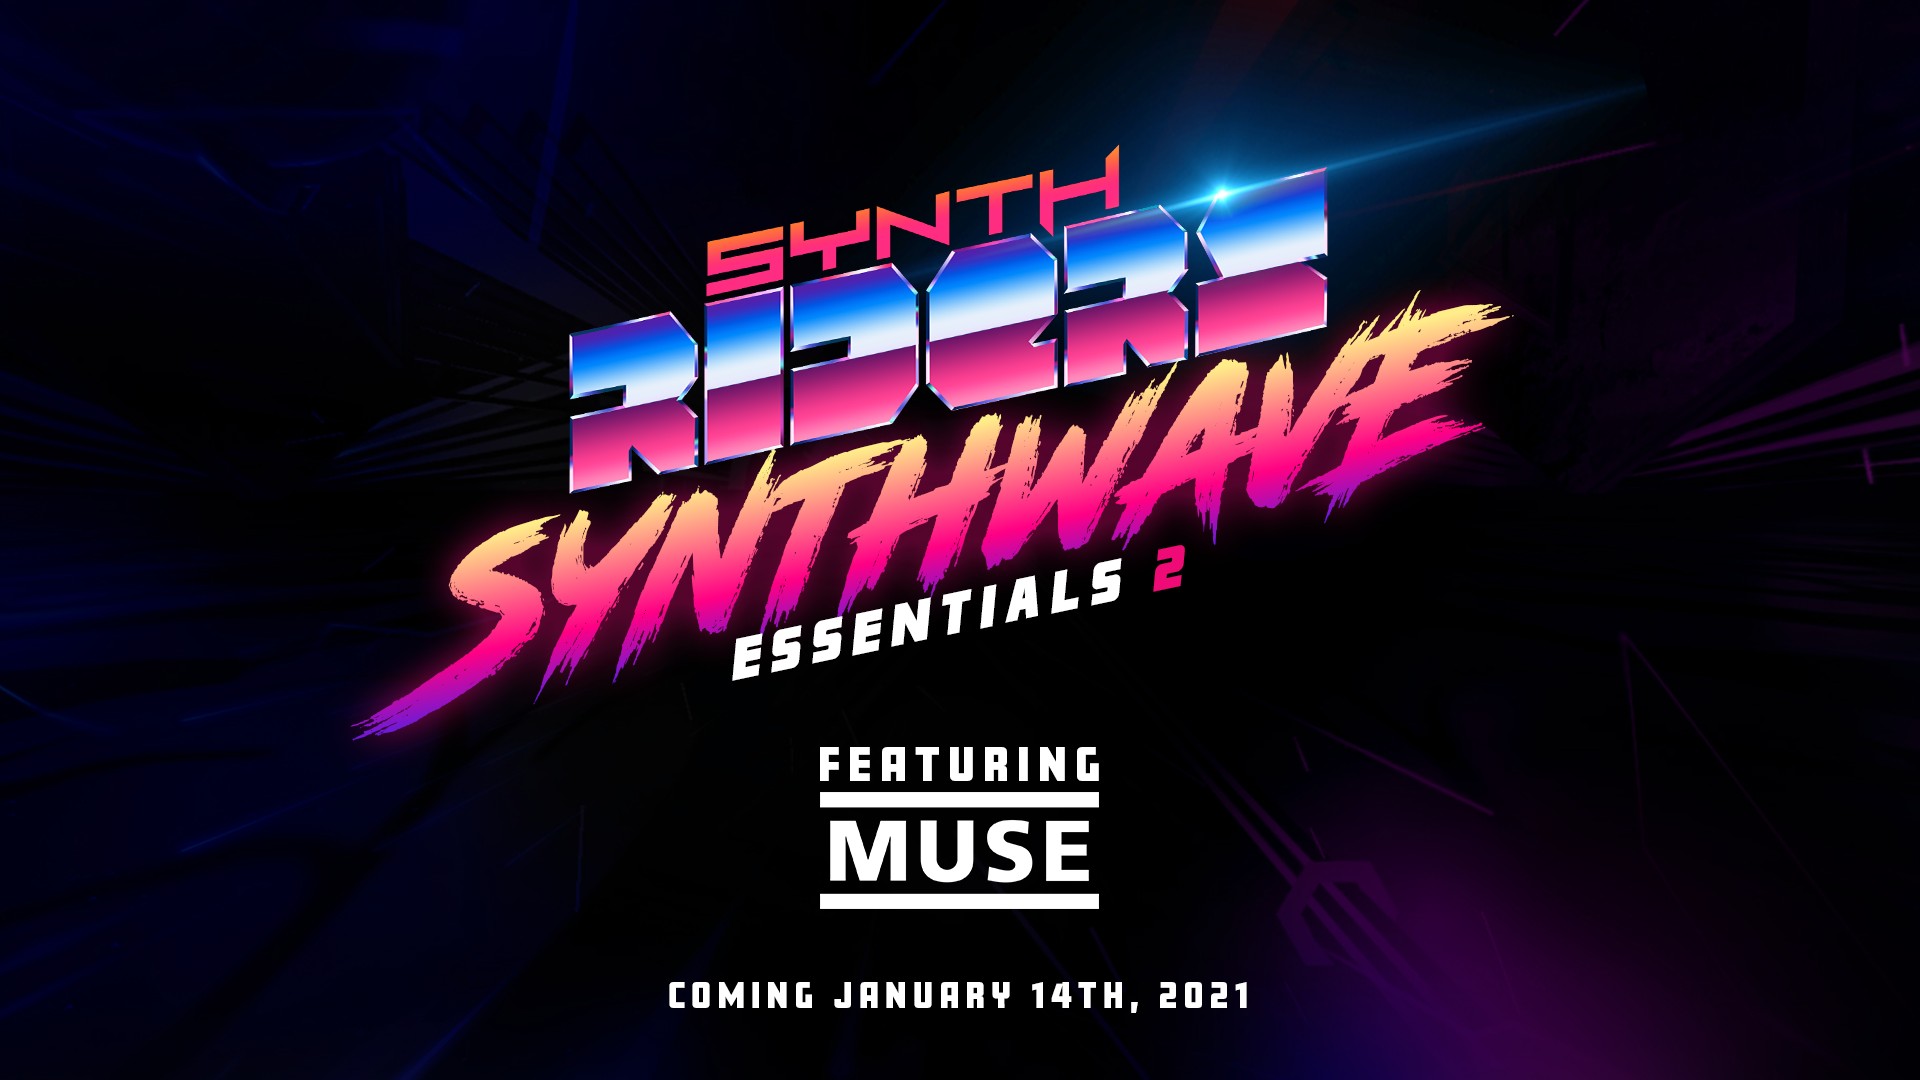 Muse Synthwave Essentials